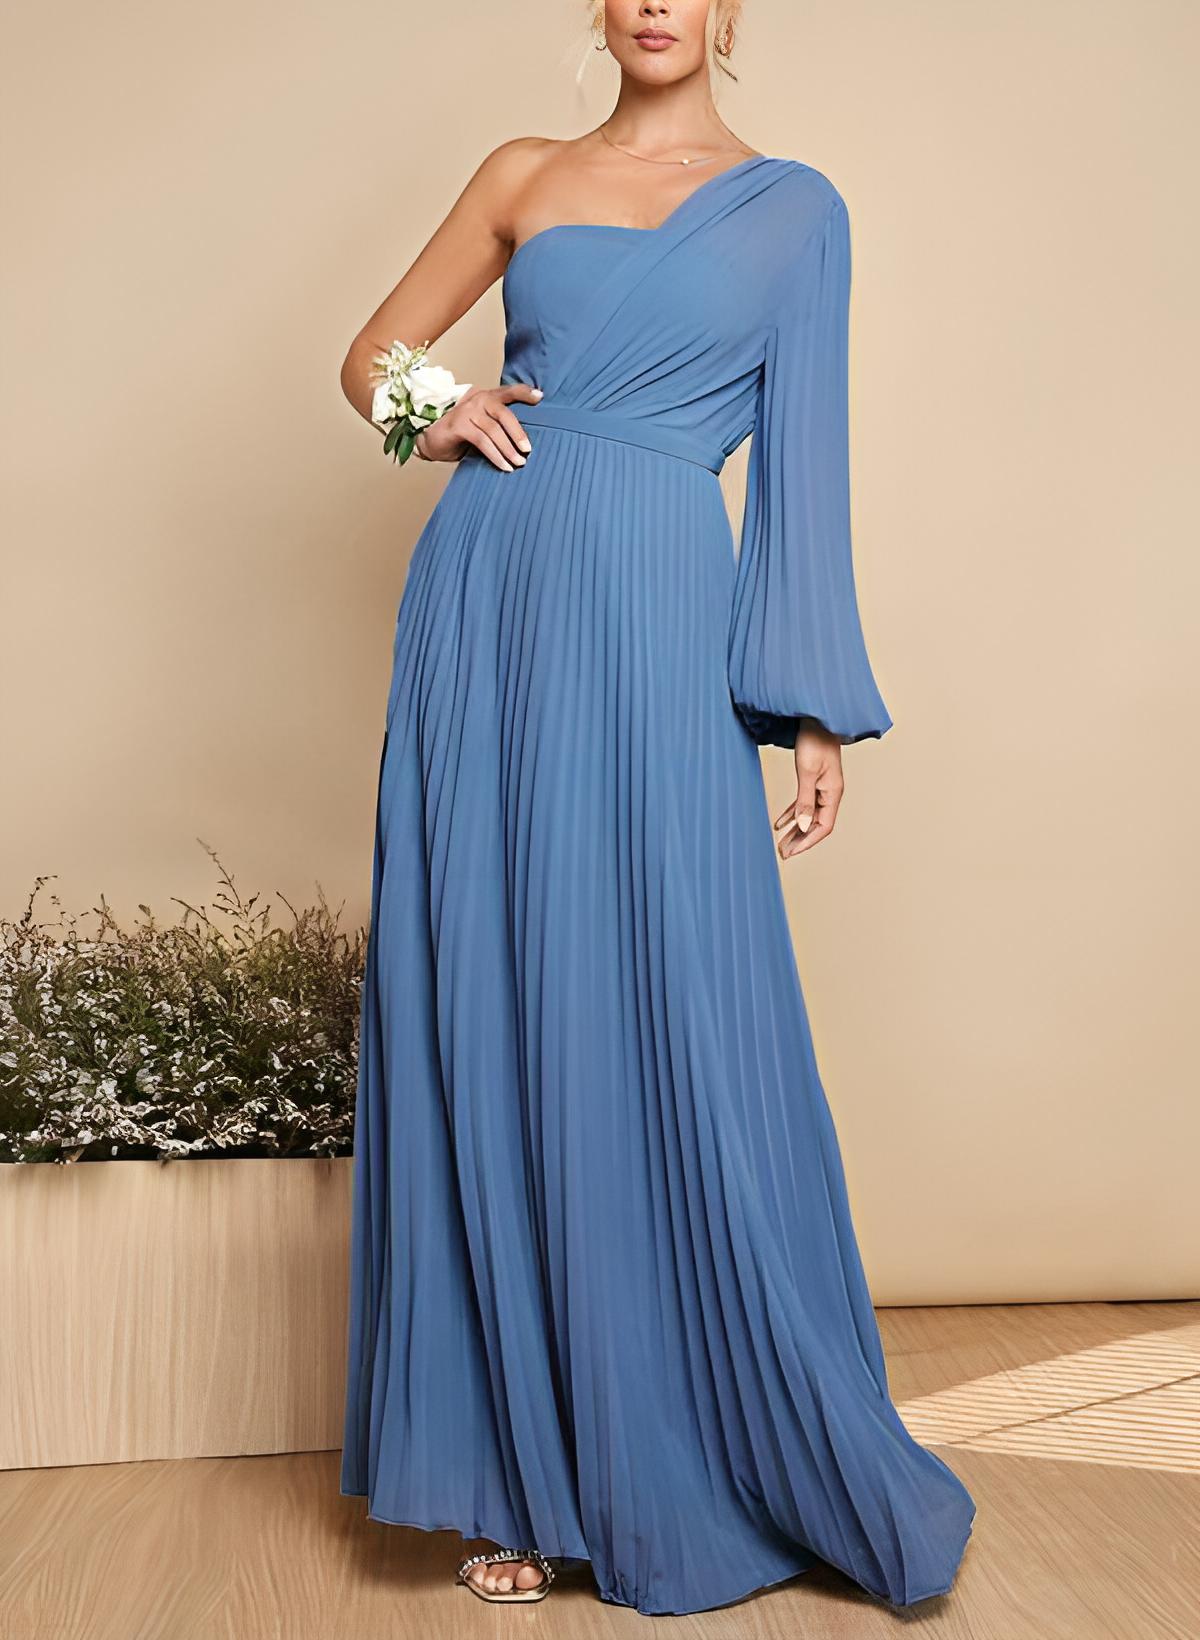 A-Line One-Shoulder Long Sleeves Floor-Length Chiffon Bridesmaid Dresses With Pleated